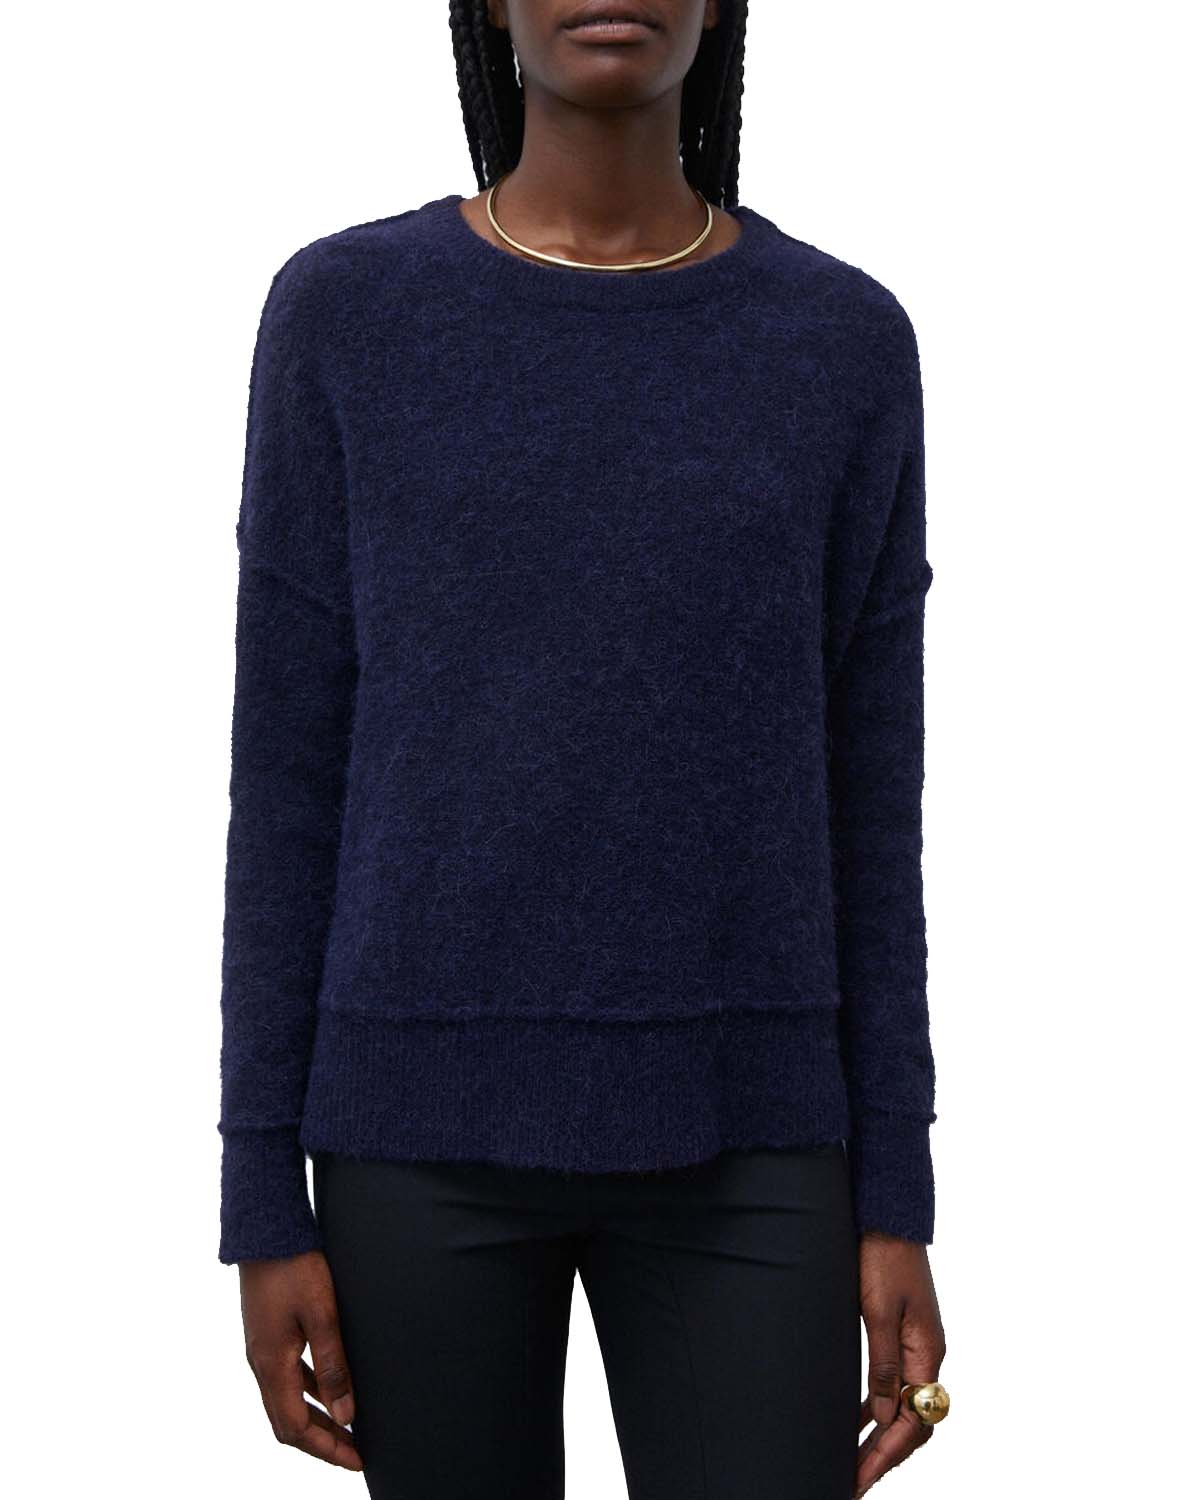 Orient Thorns gryde By Malene Birger Biagio Night Sky - Pullover På Zoovillage